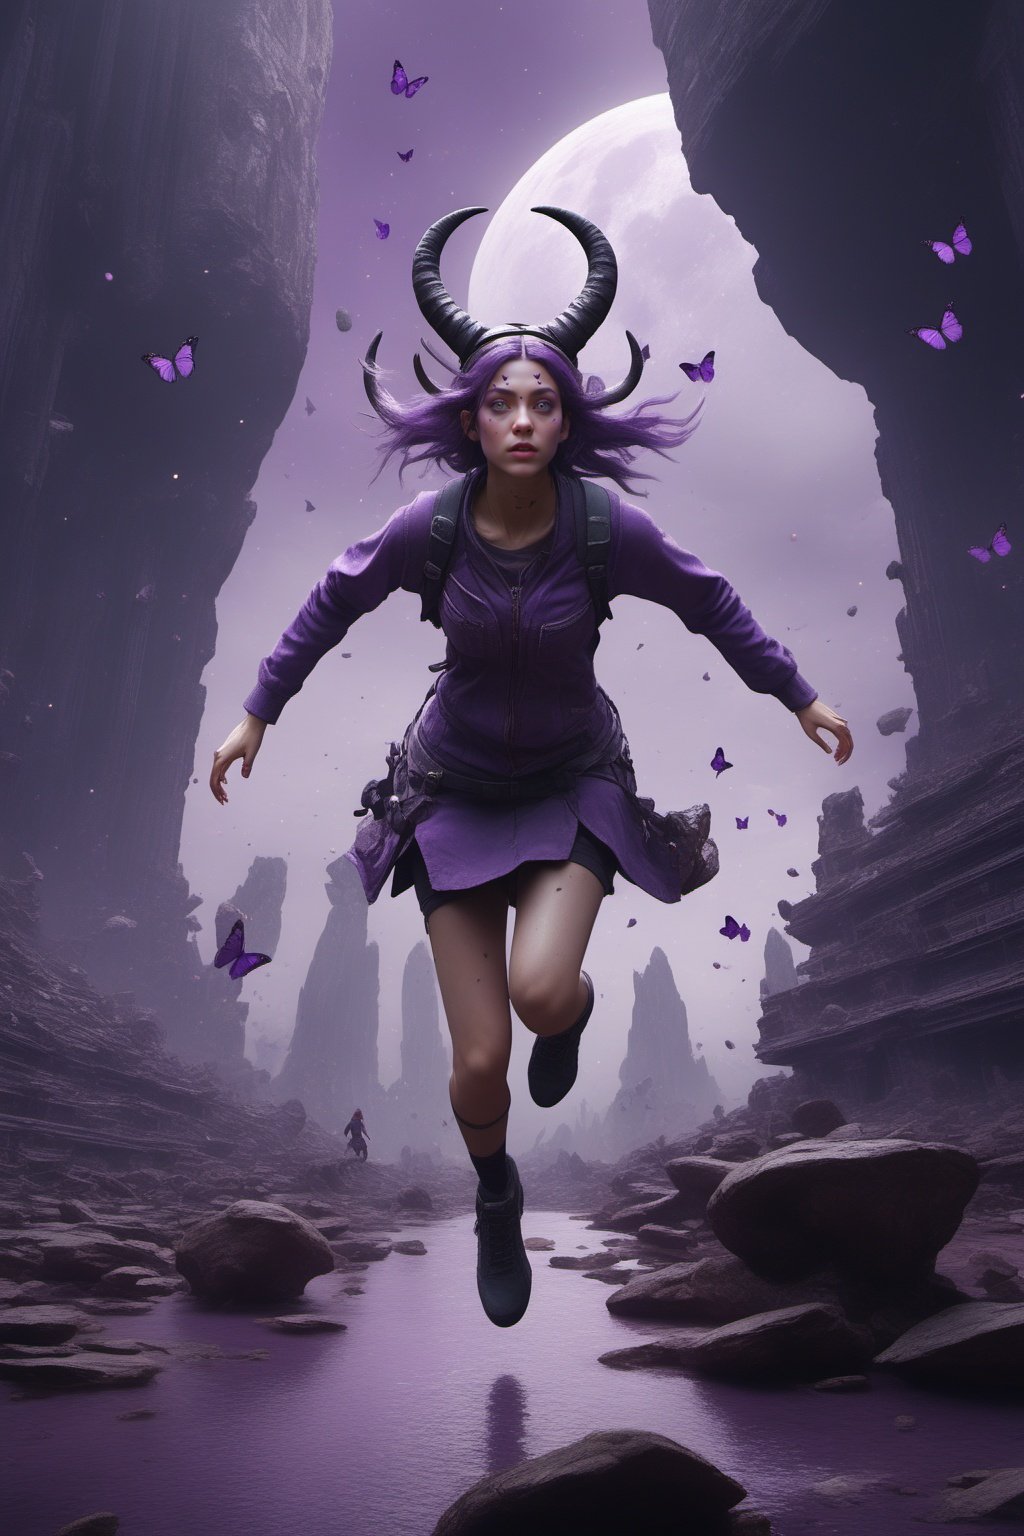 2girl,two horns on his head,looking from above,the space,afloat,moons,Running position,Wide-angle lens distortion,purple butterfly,rock,Photographic,3D Model,Cinematic,(masterpiece:1.4),Rebellious girl,NVDI,building,A high resolution,ultra - detailed,<lora:SDXL_Alien_garbage:0.7>,